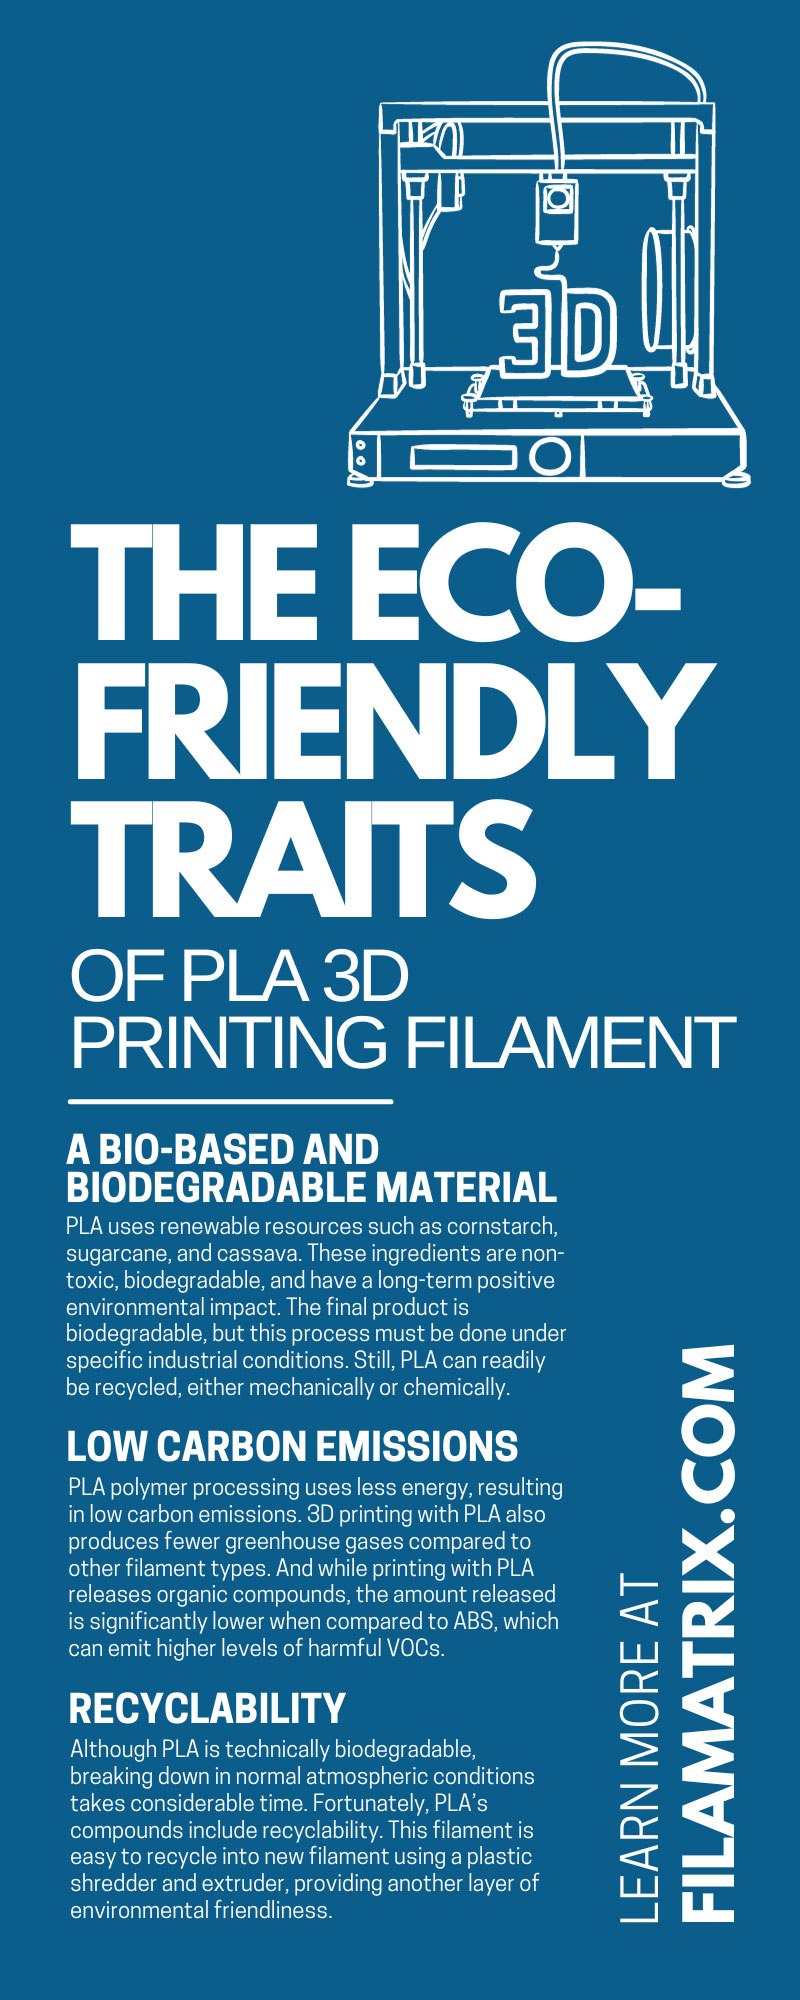 The Eco-Friendly Traits of PLA 3D Printing Filament